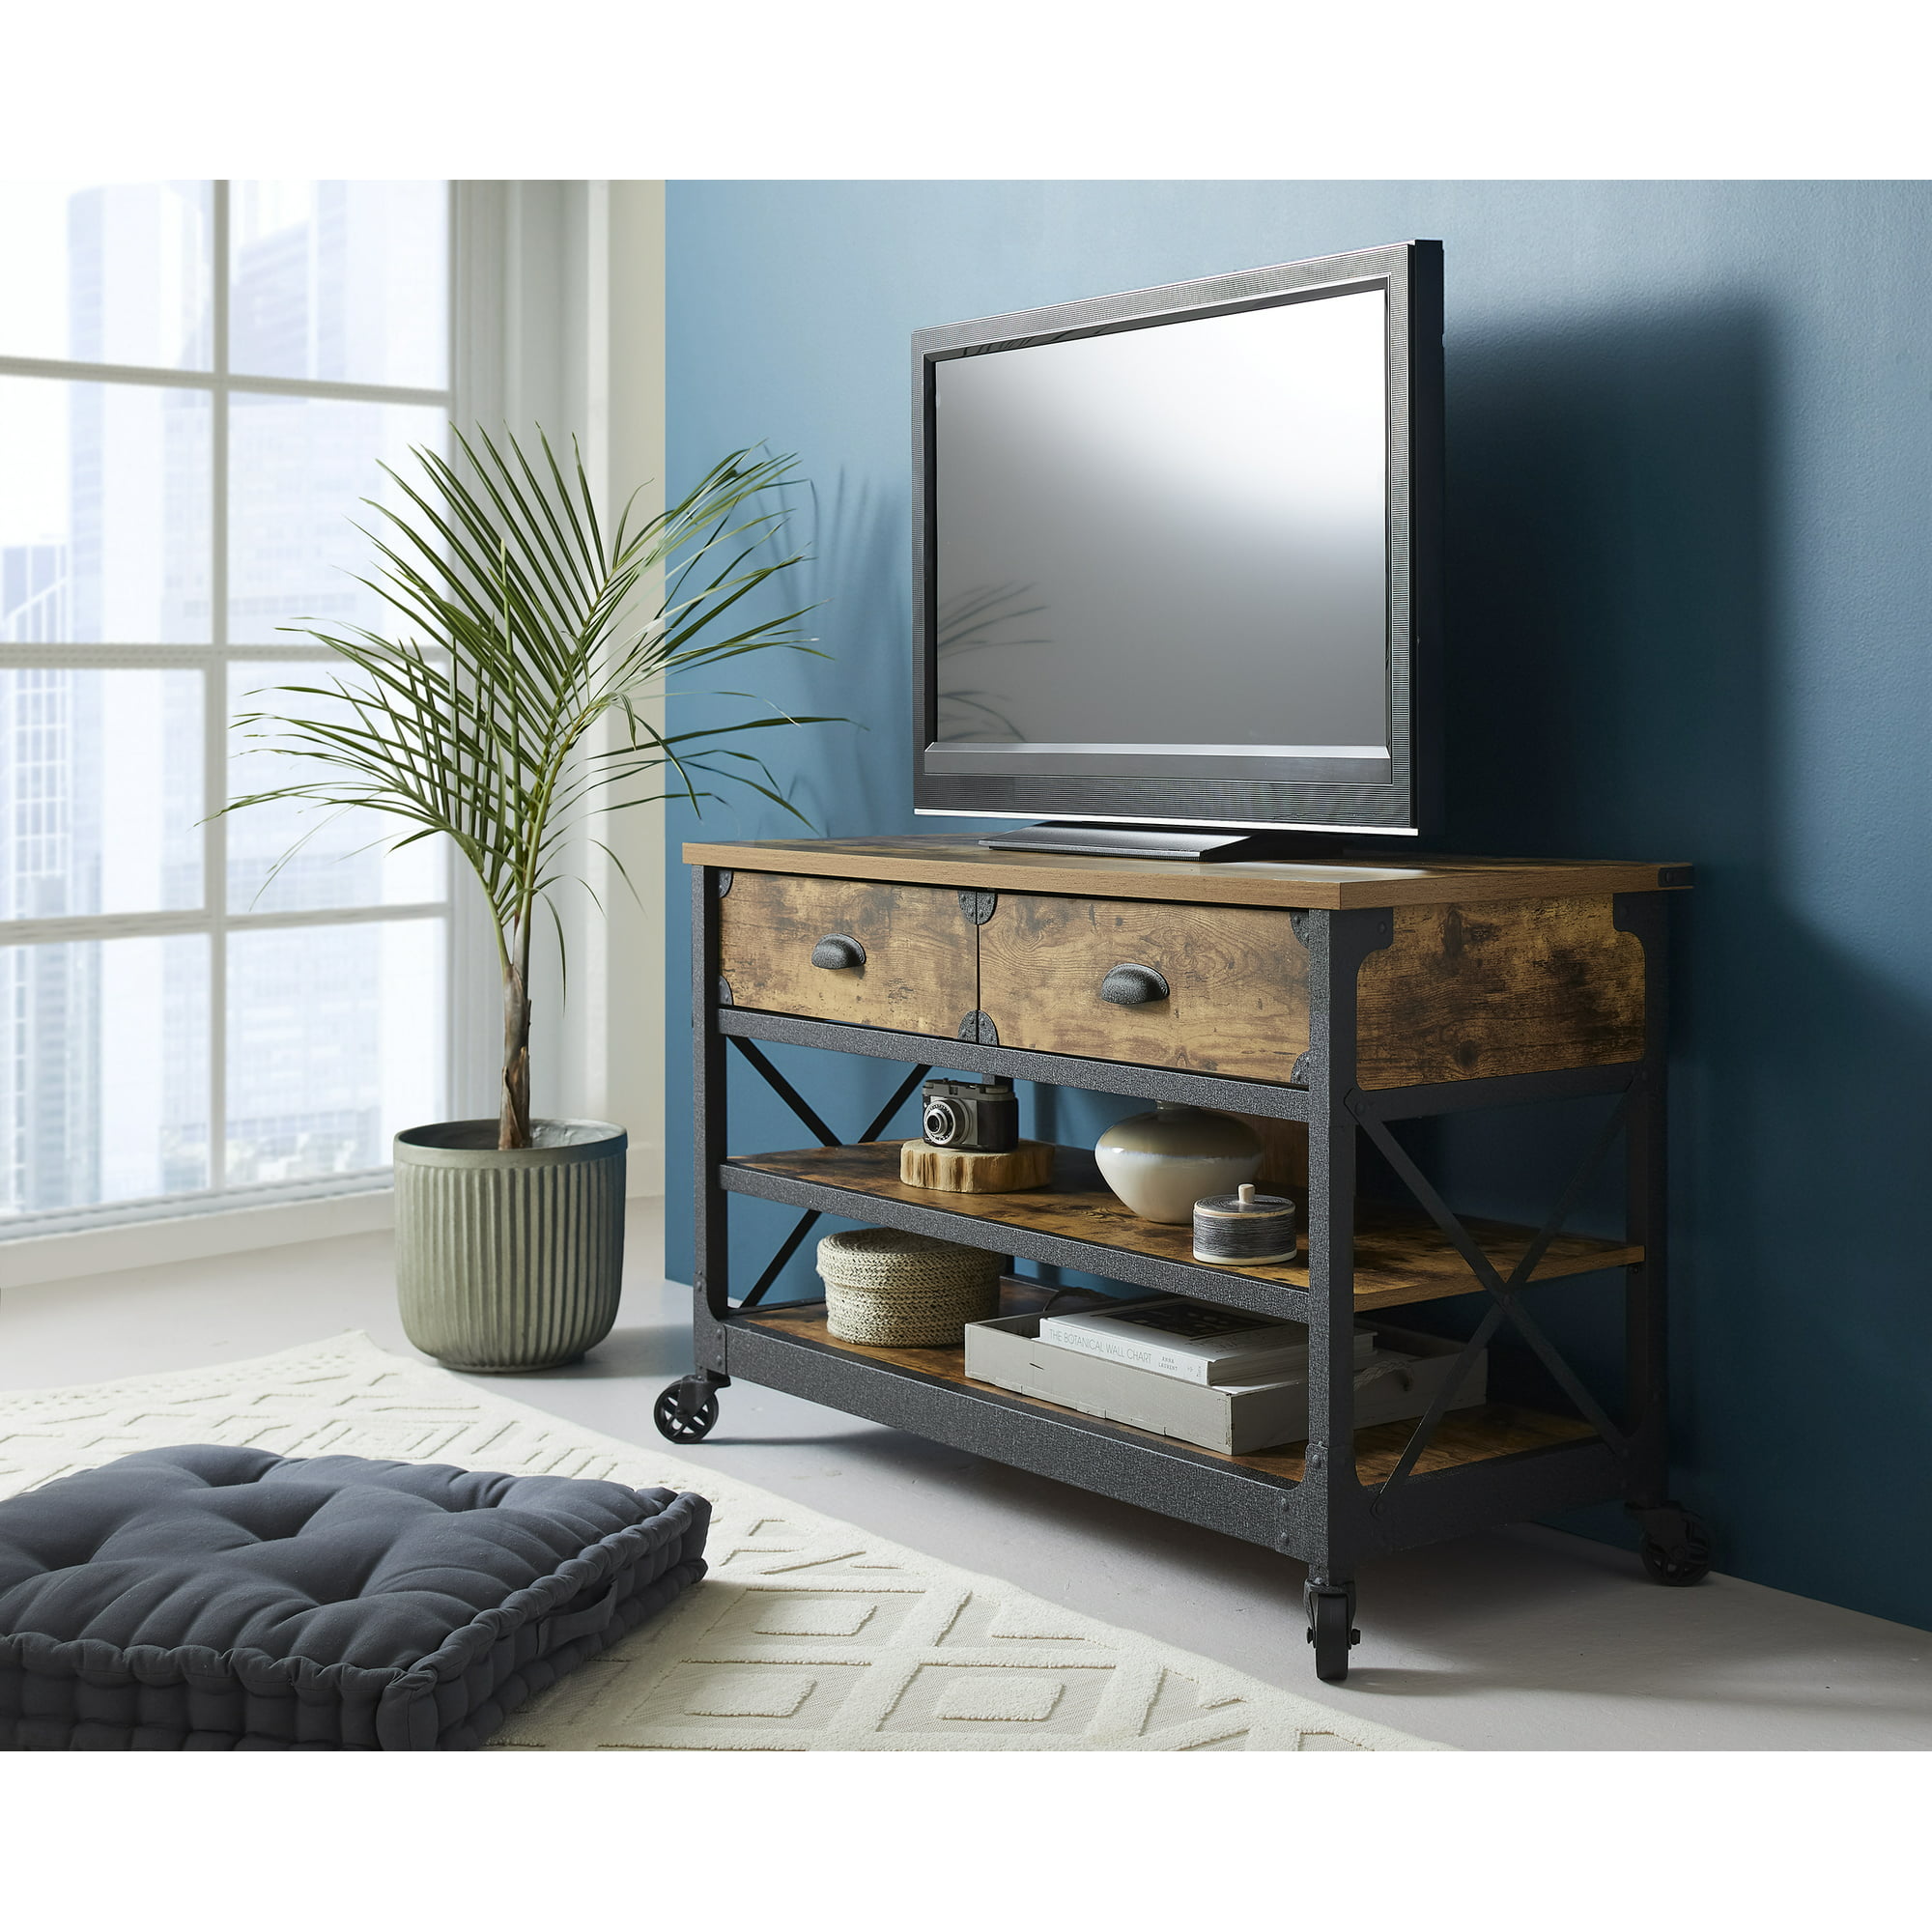 Better Homes & Gardens Rustic Country TV Stand for TVs up to 52" (Weathered Pine Finish) $53.70 + Free Shipping